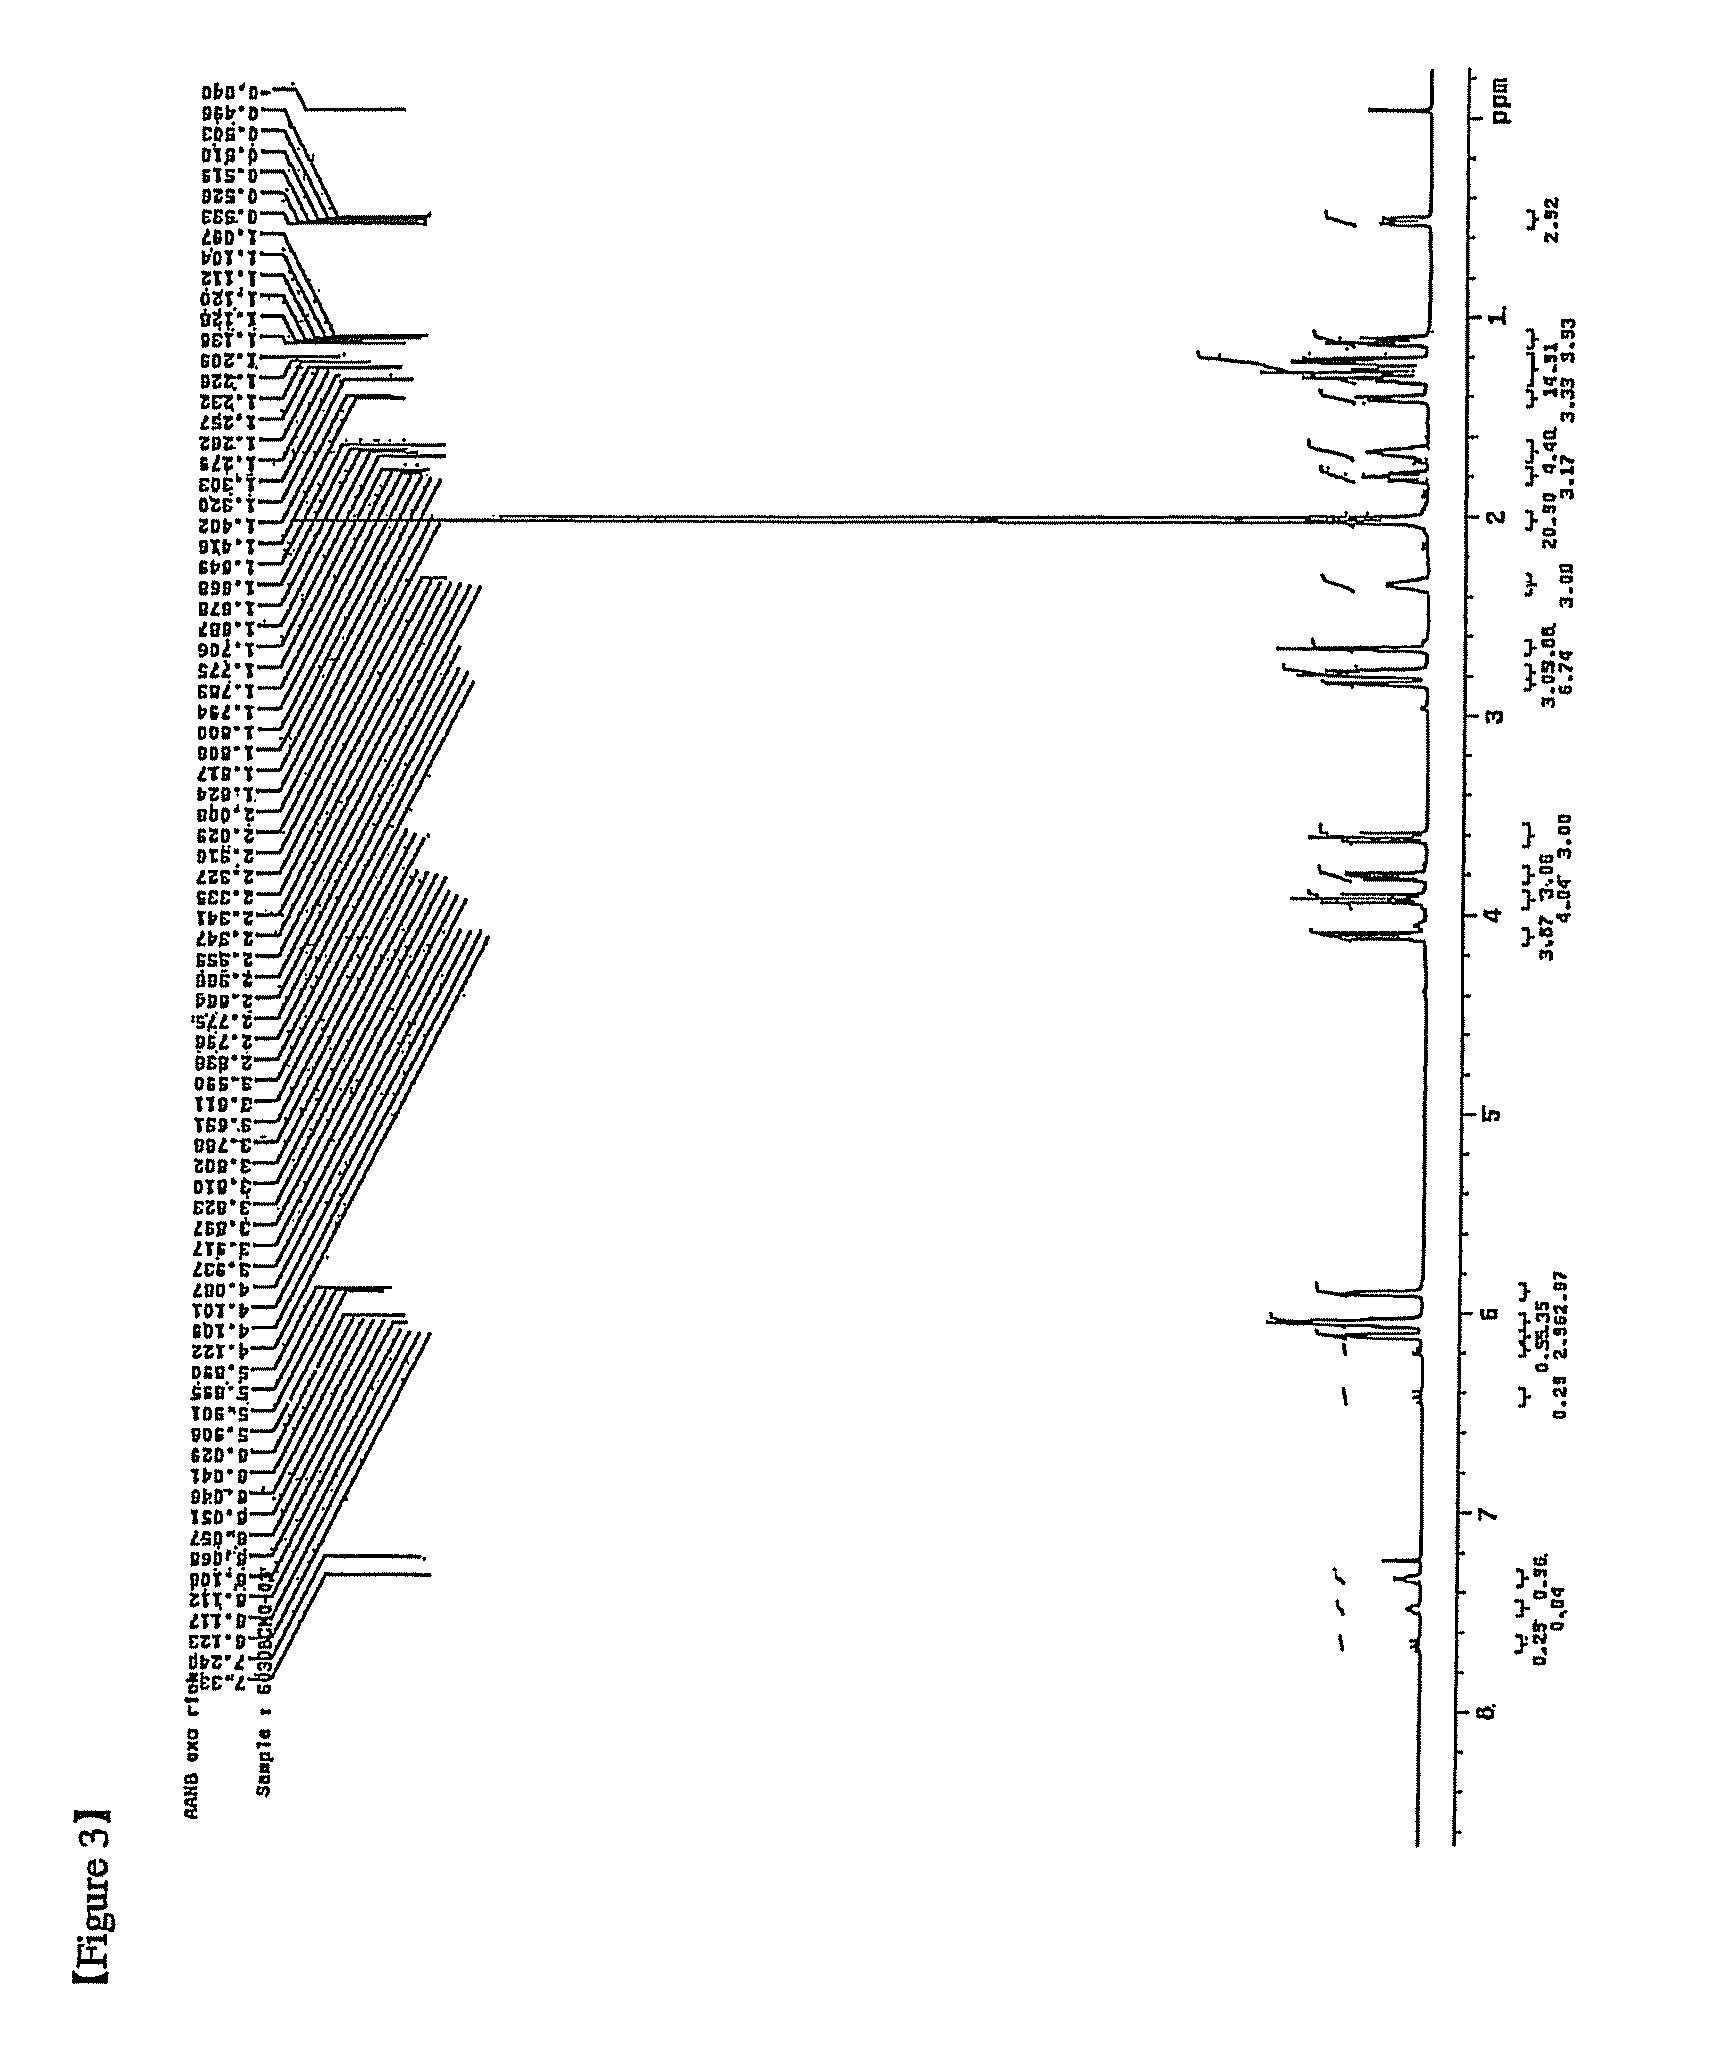 Method for producing norbornene monomer composition, norbornene polymer prepared therefrom, optical film comprising the norbornene polymer, and method for producing the norbornene polymer